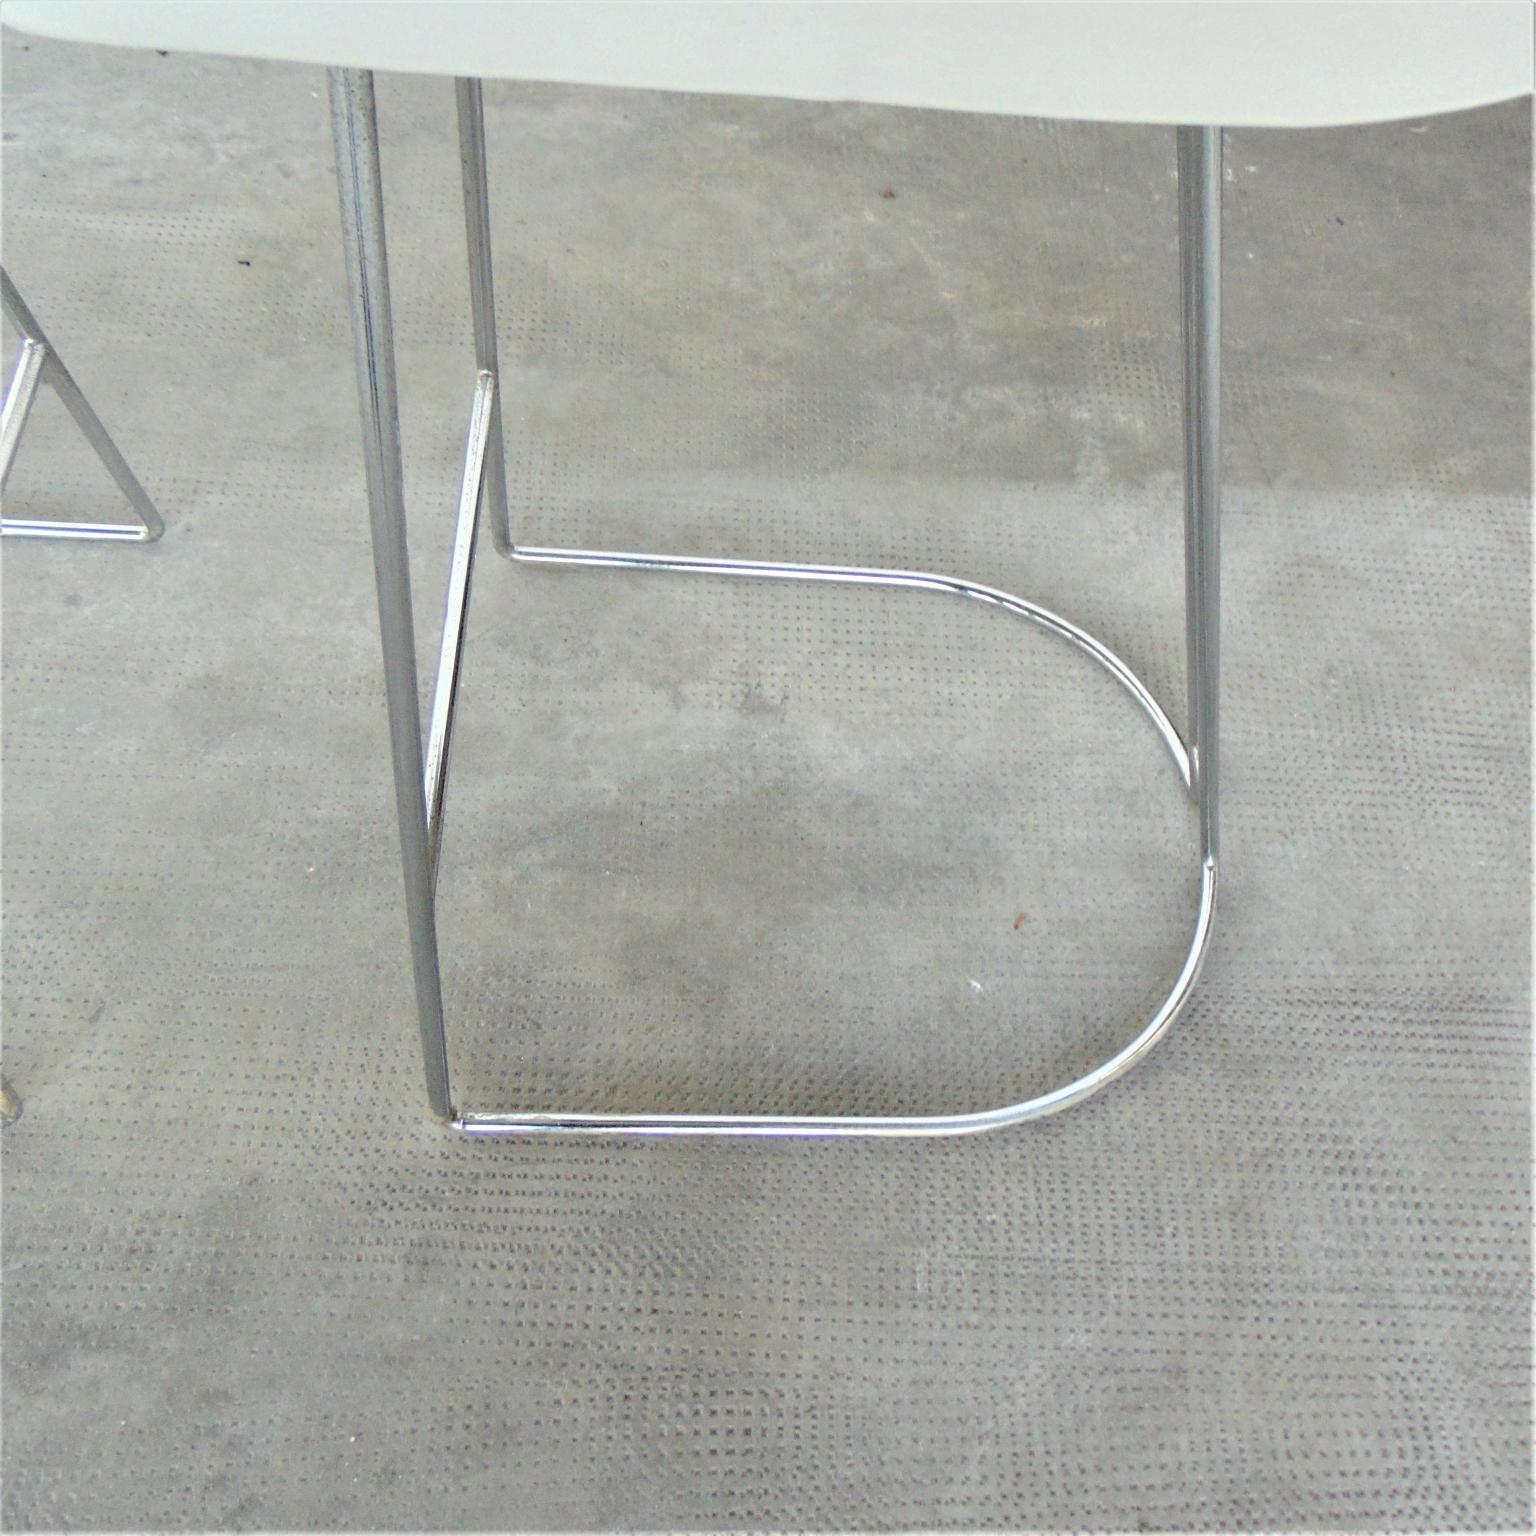 1983 Barstools Set White Leather and Chromed Steel by Sormani, Italy For Sale 2